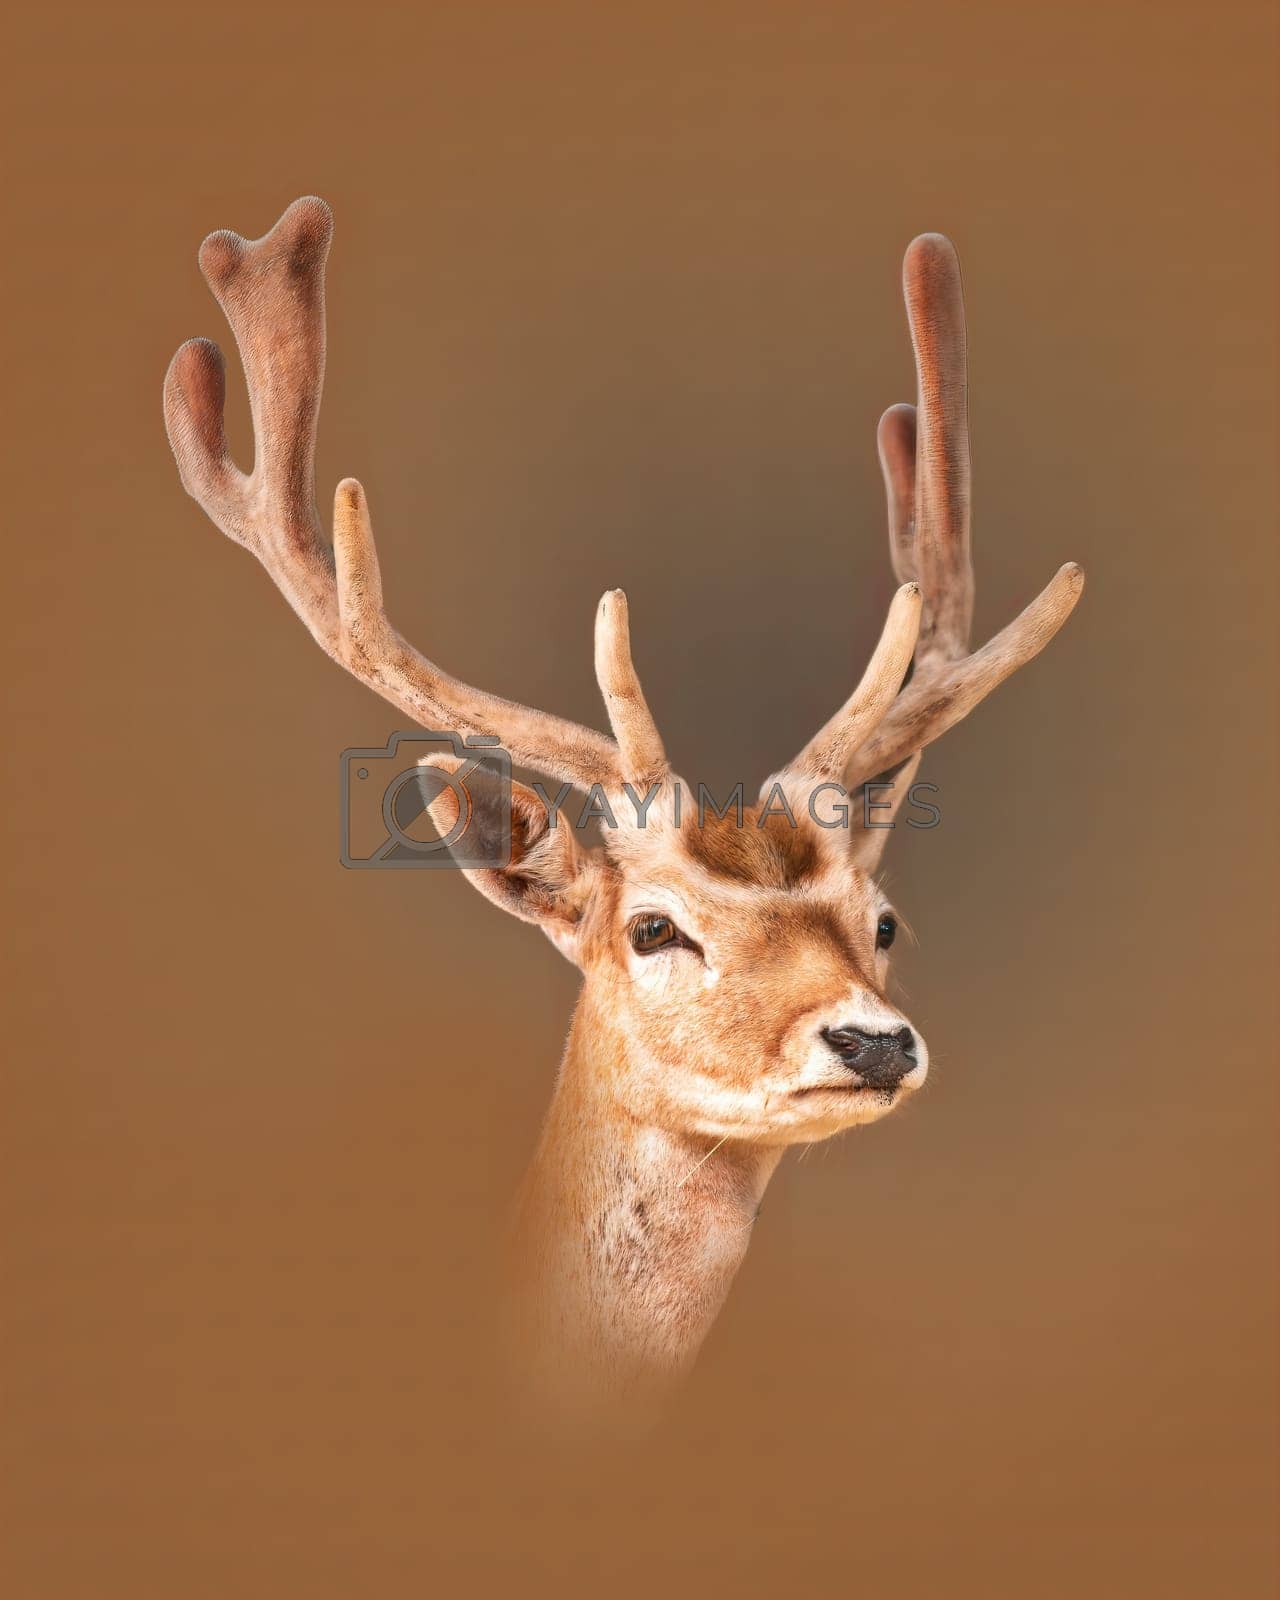 Royalty free image of one portrait of a pretty fallow deer buck by mario_plechaty_photography